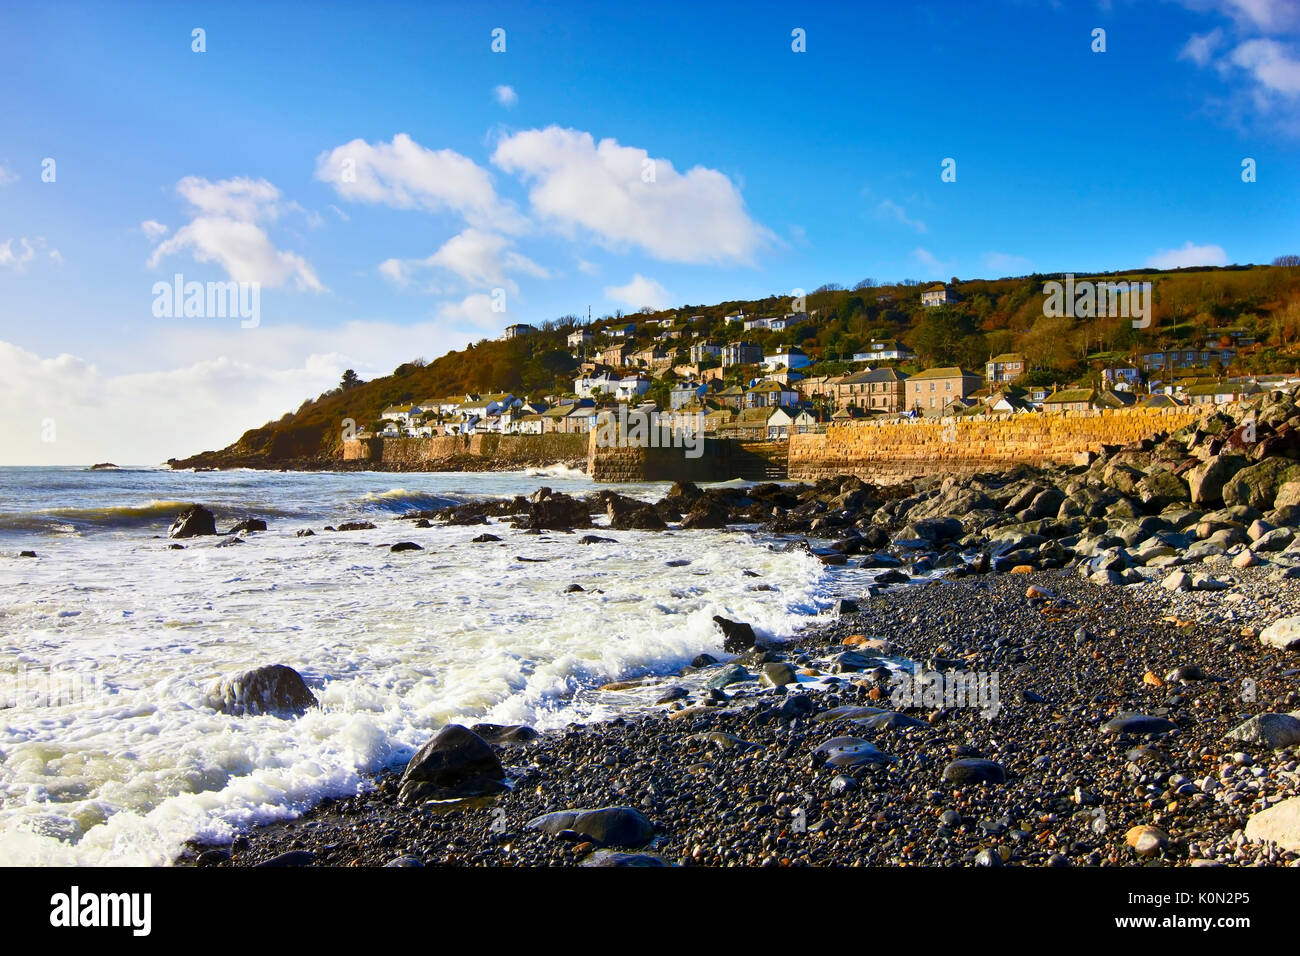 A view along the pebbled coast of Mousehole, Cornwall, UK Stock Photo